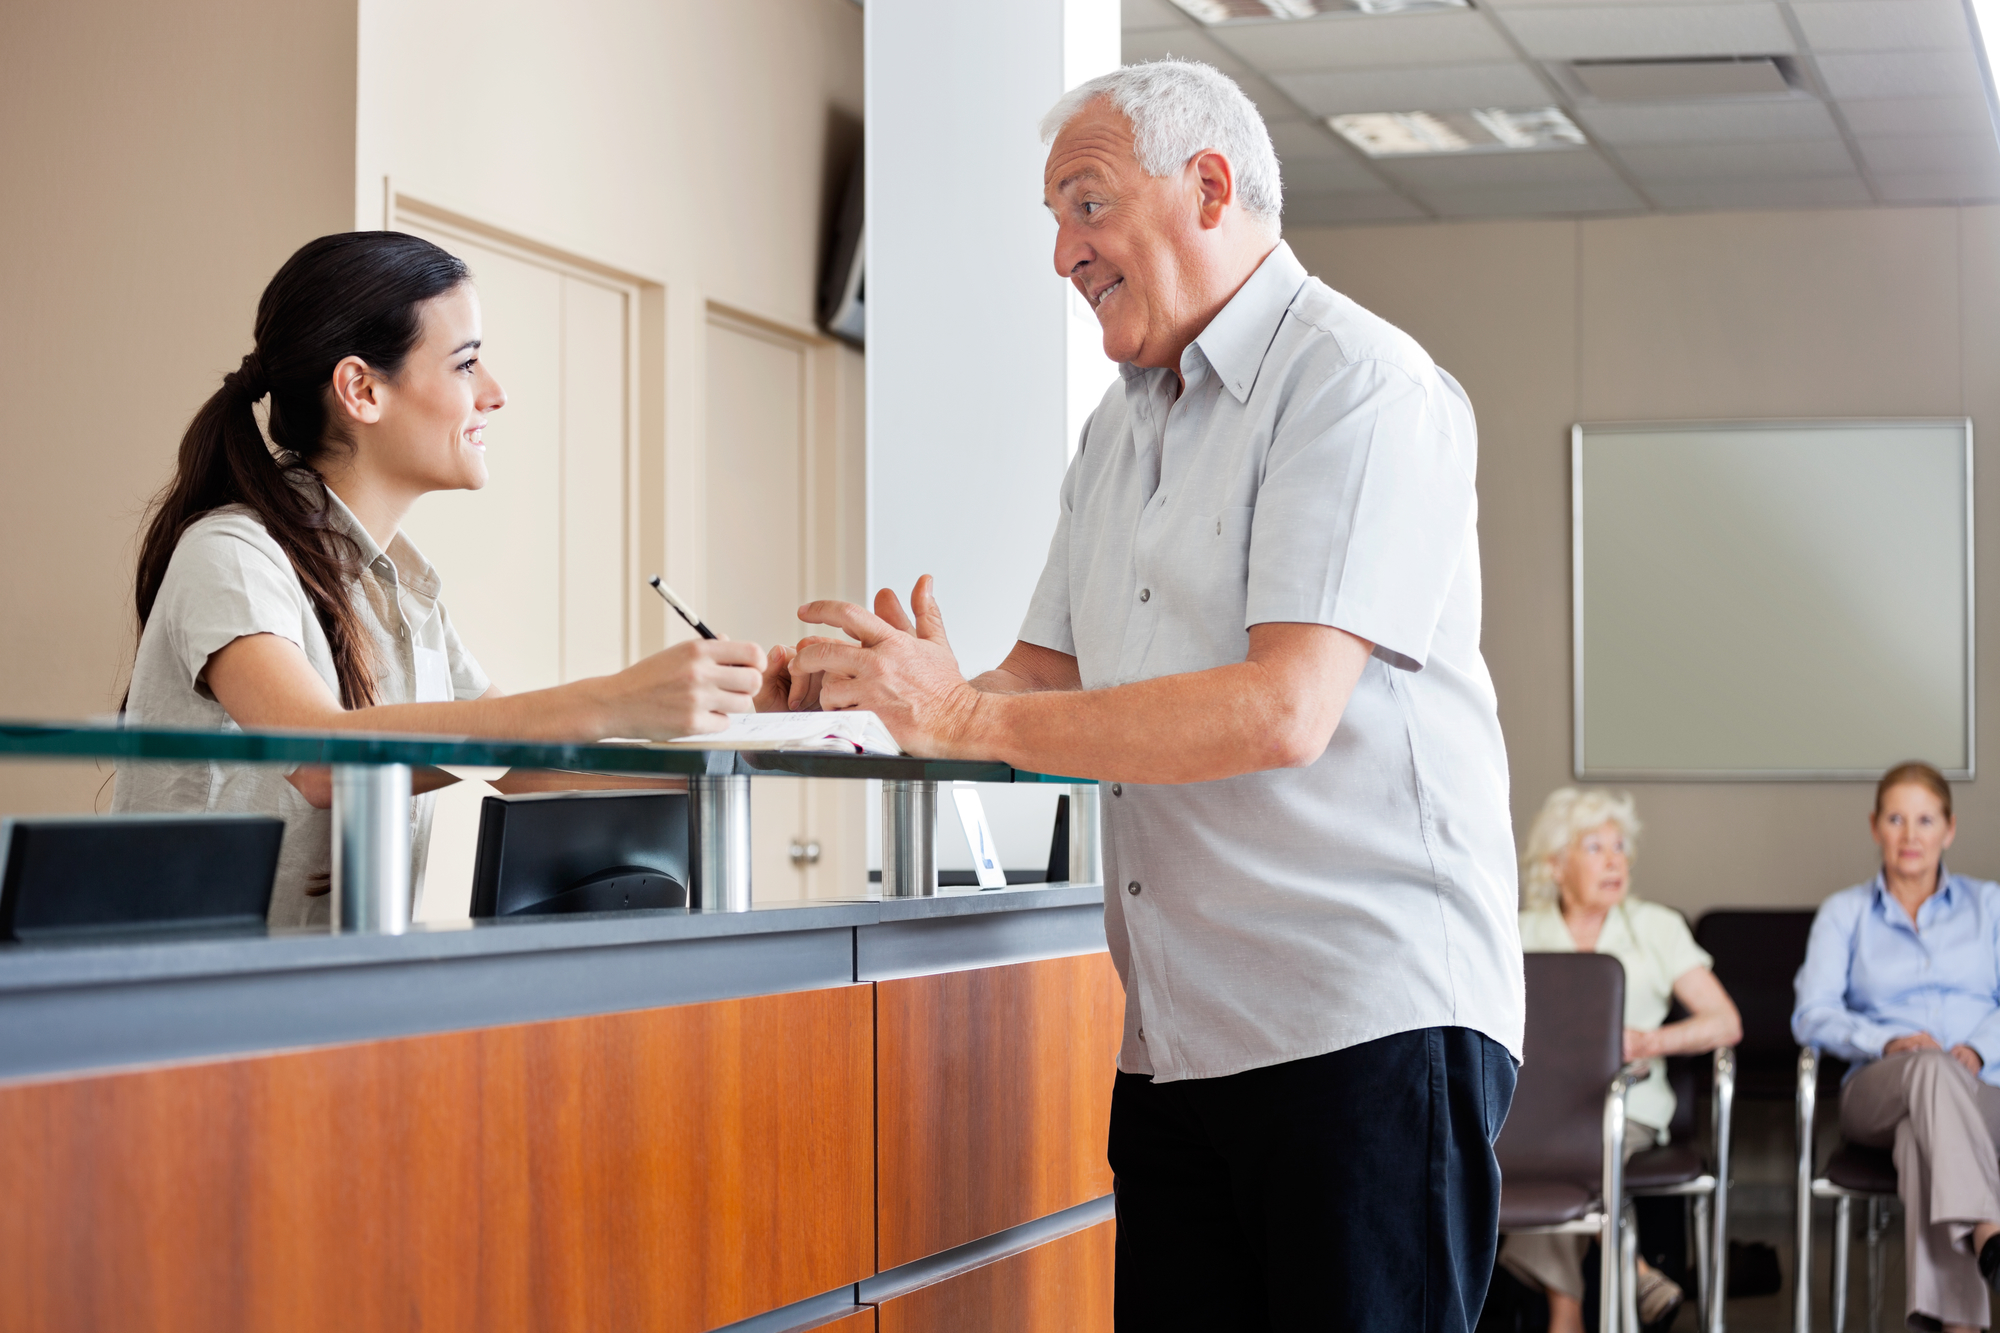 patient engaging with receptionist at medical office